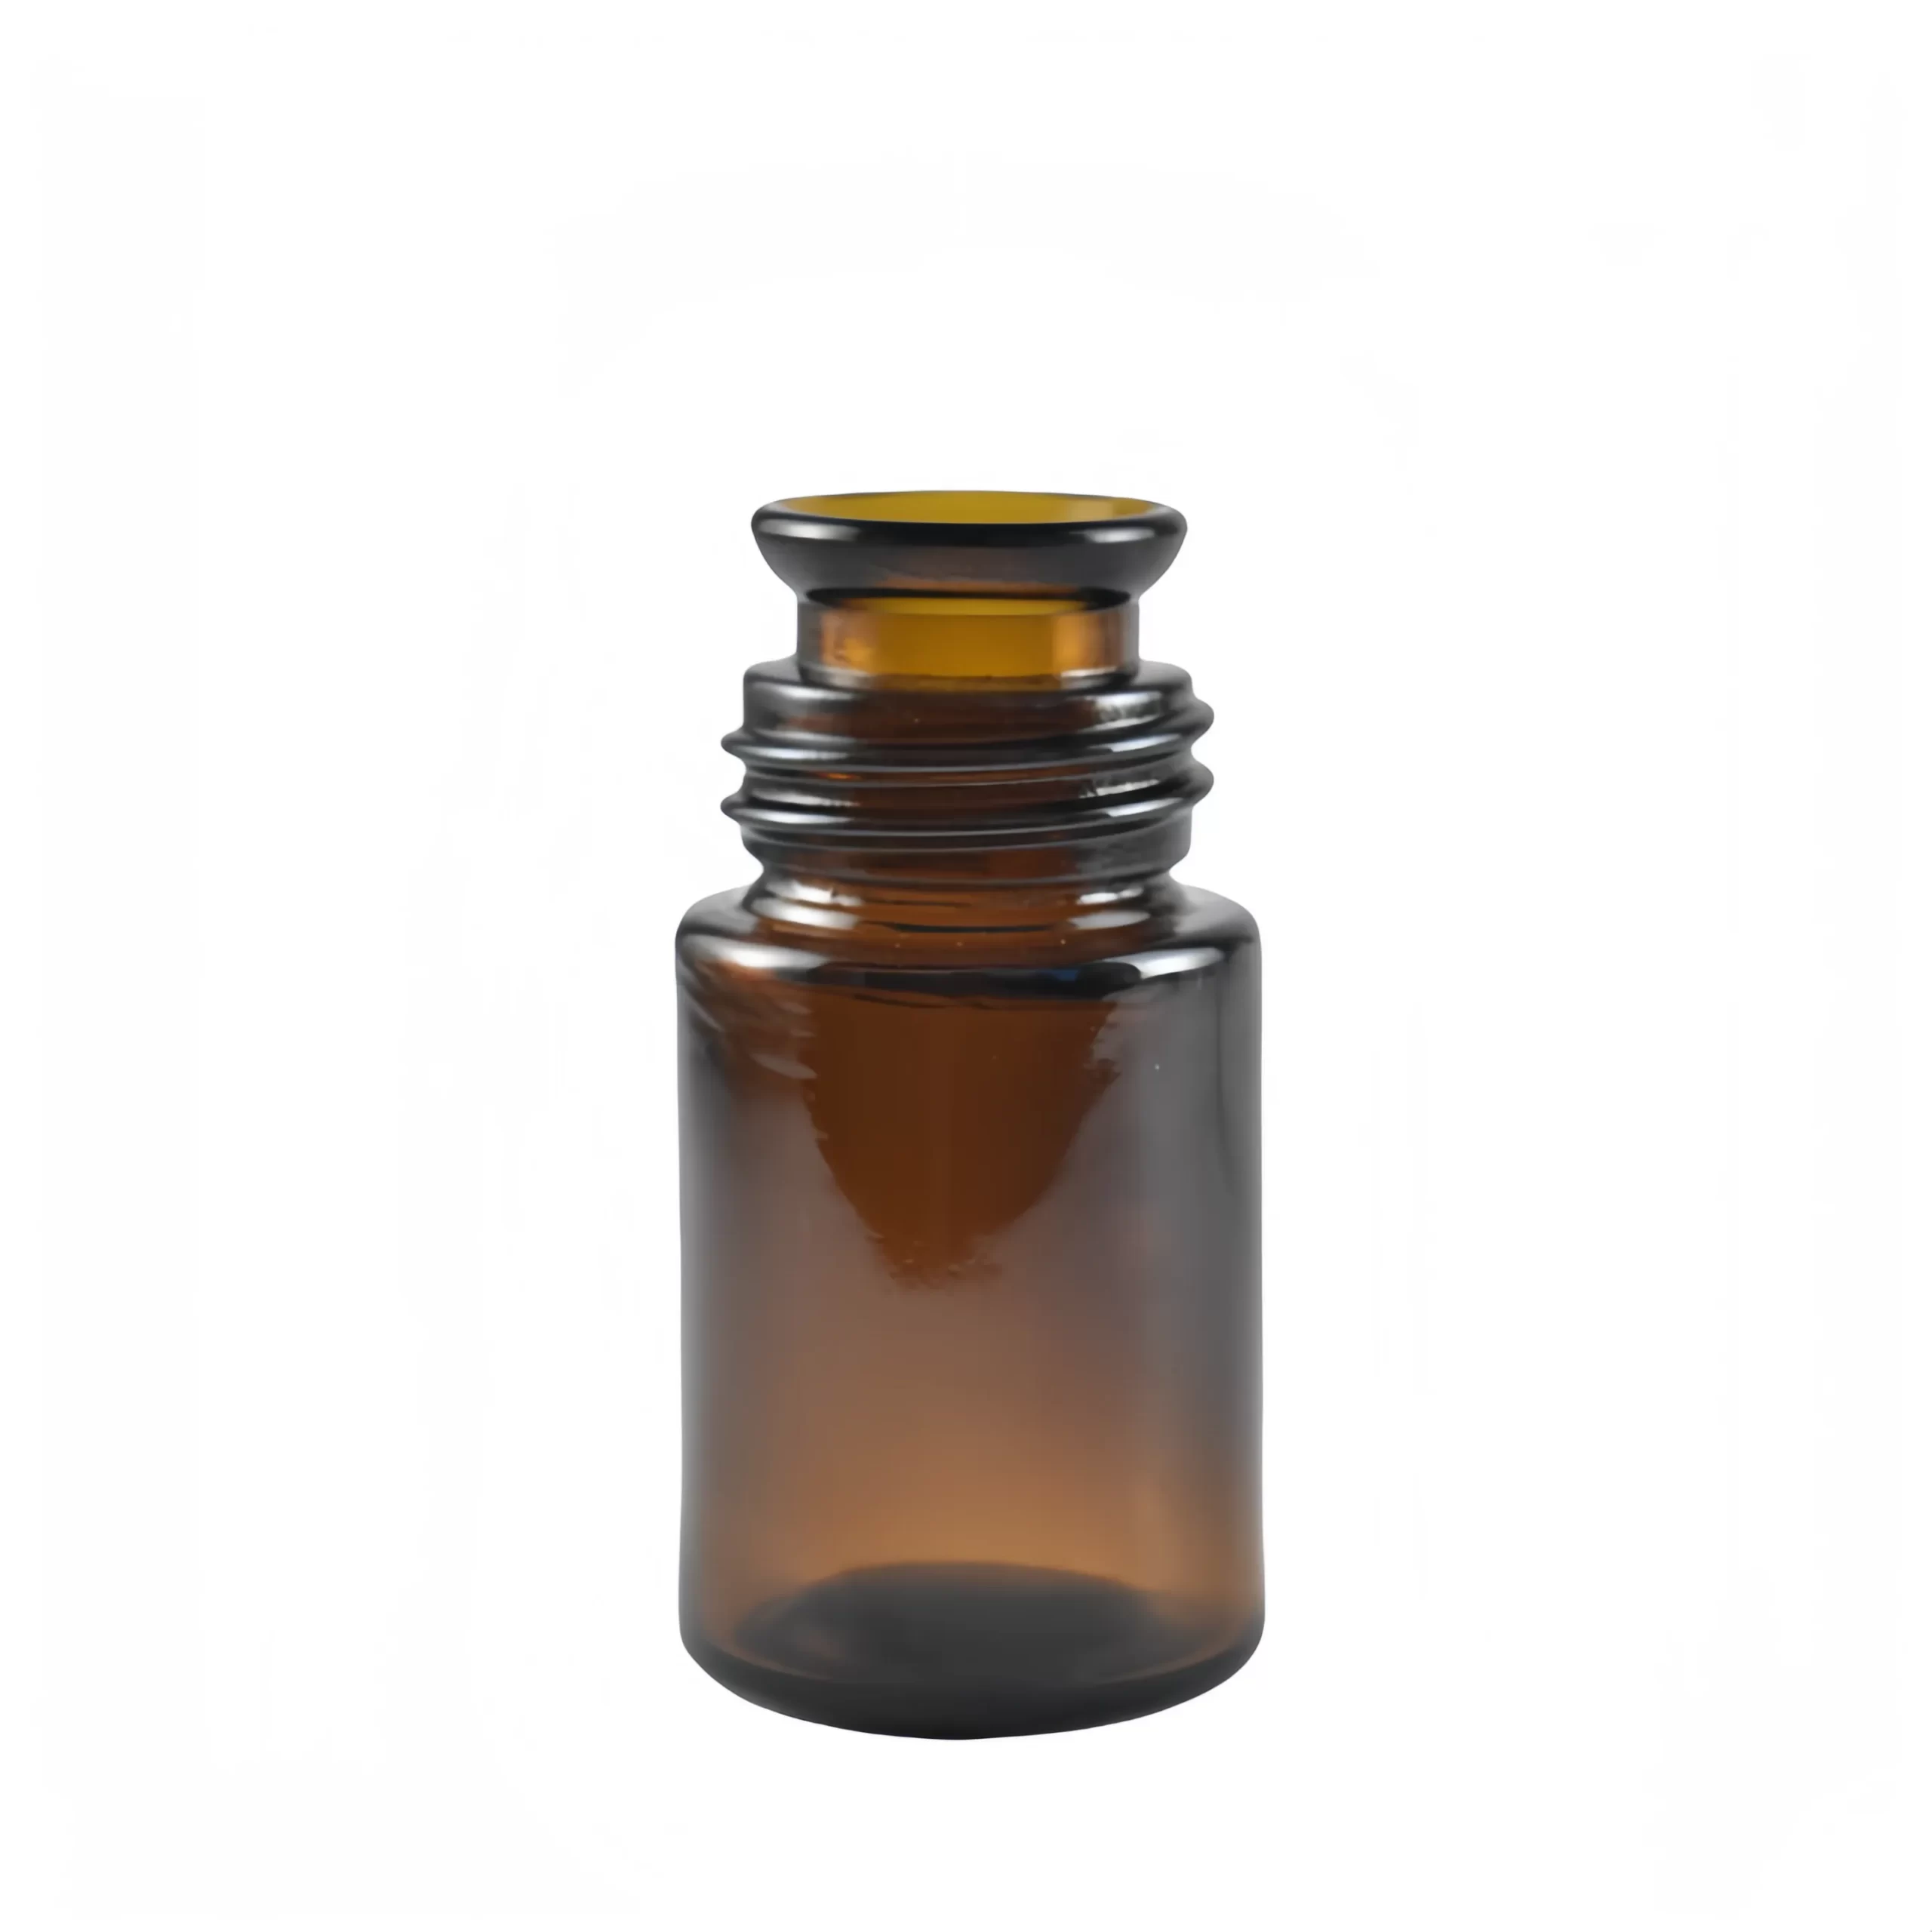 30ml pour out round glass bottle